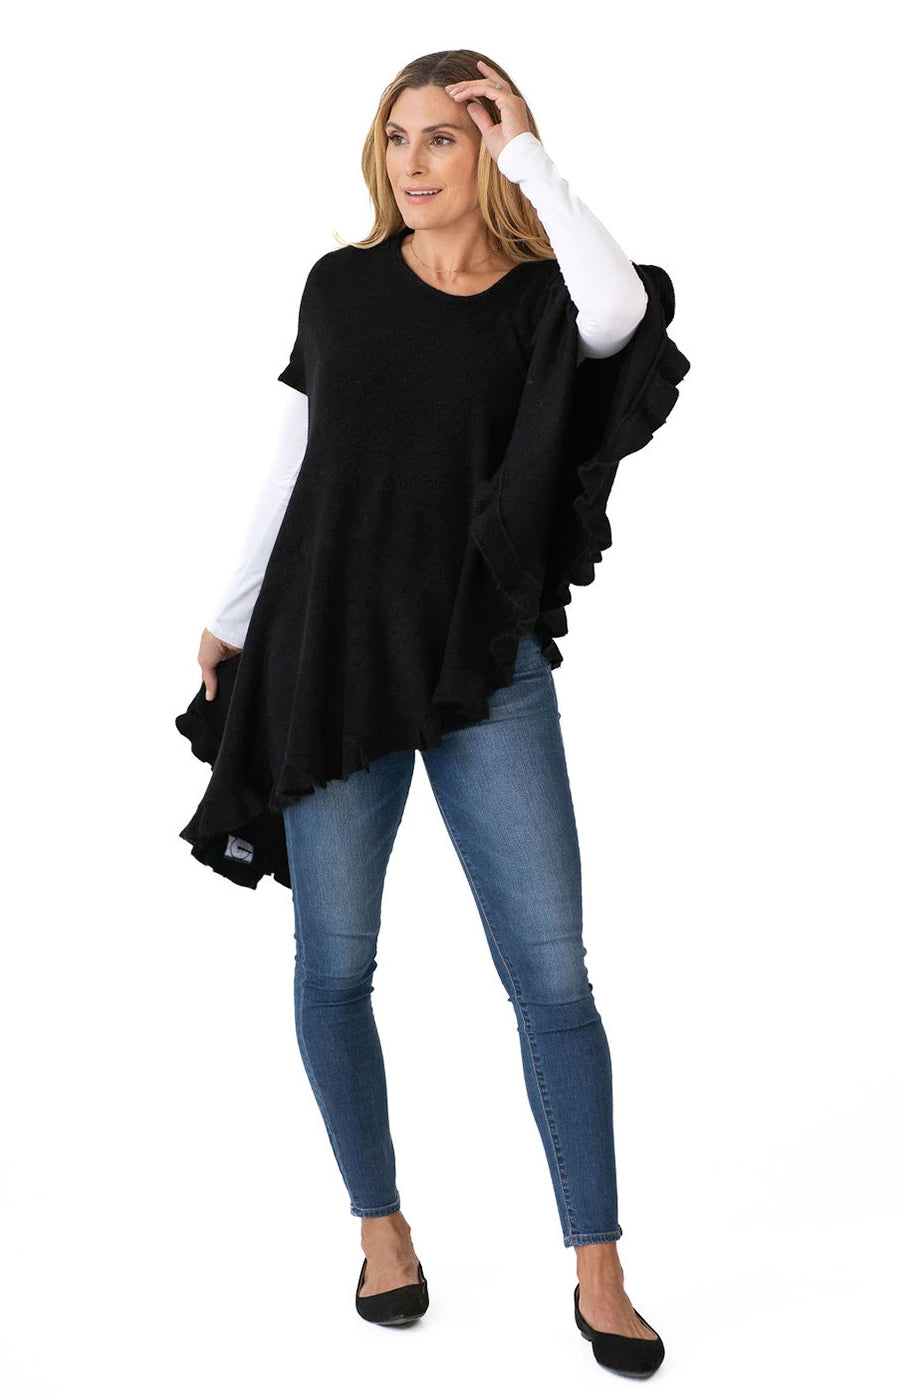 Shawl Sweater Vest in Black with Ruffle Trim